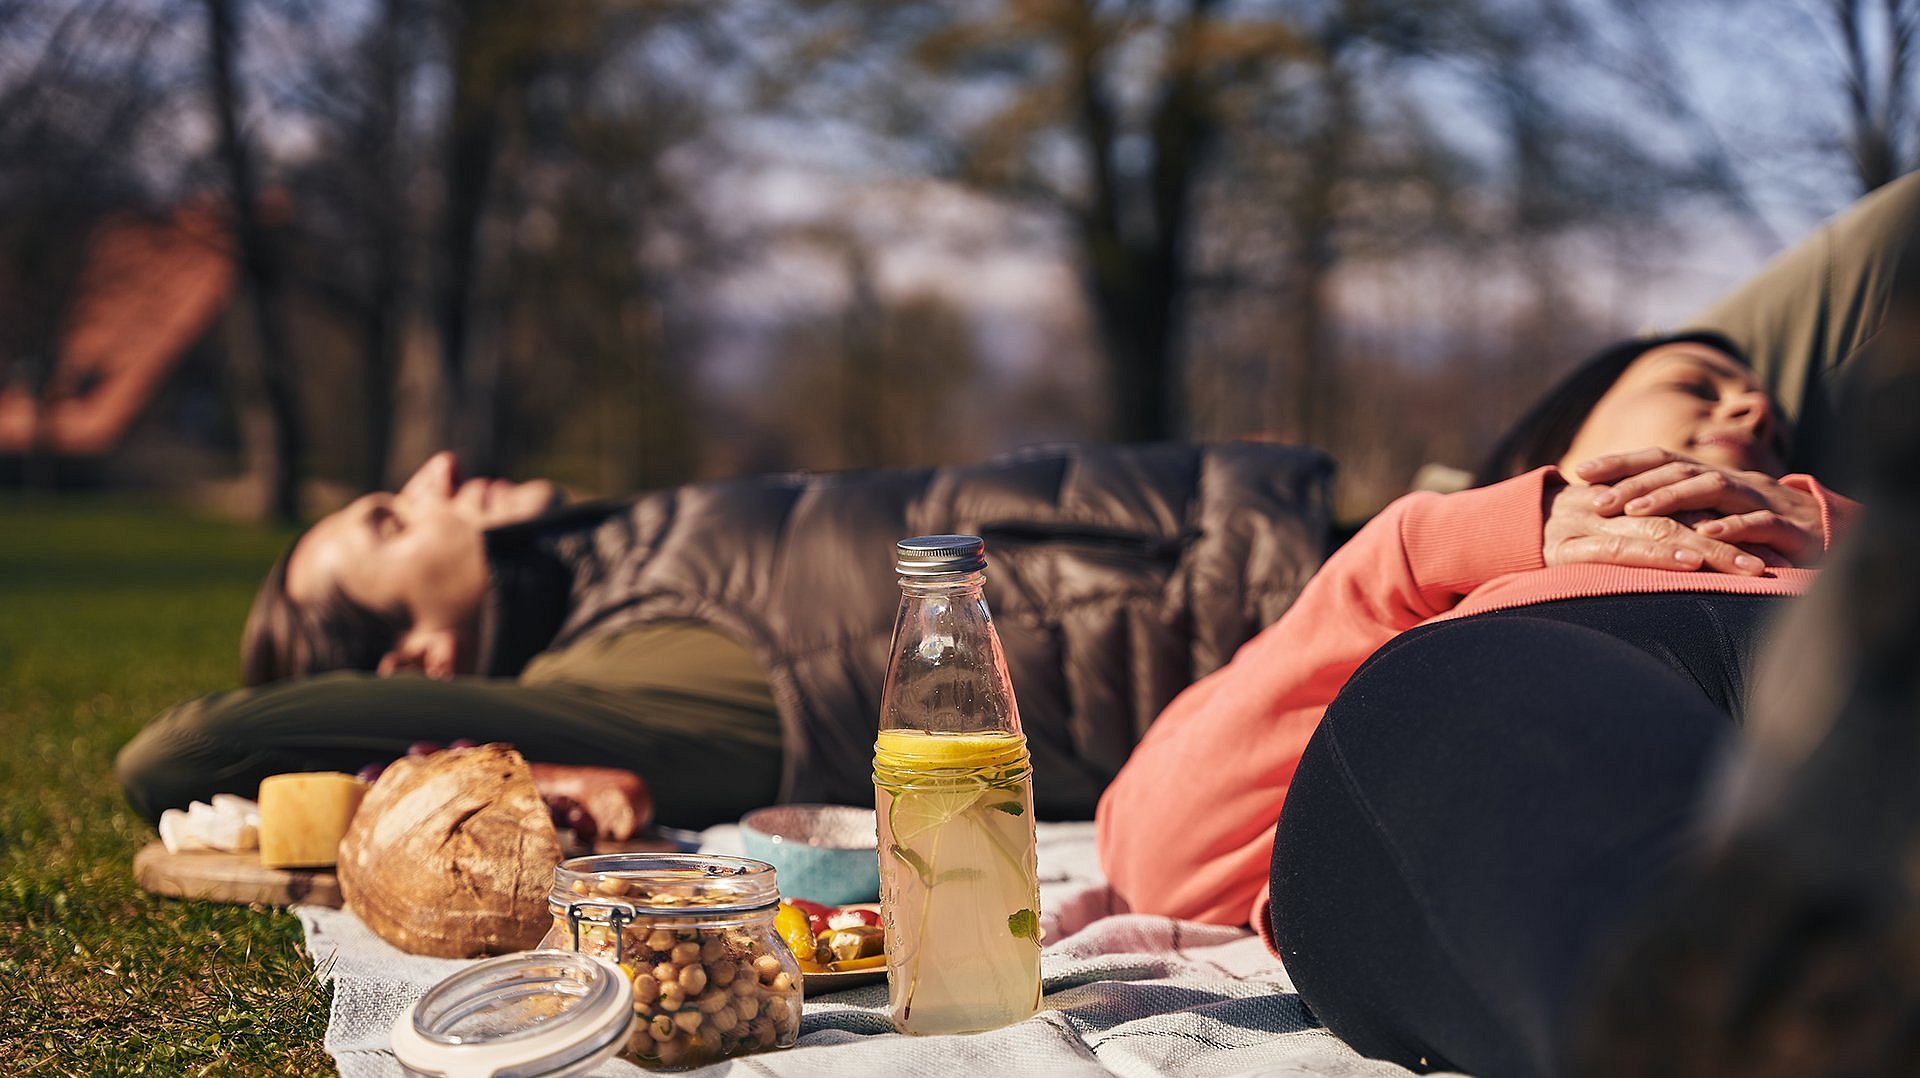 Couple enjoys the autumn weather and lies on meadow with picnic blanket and provisions and sleeps